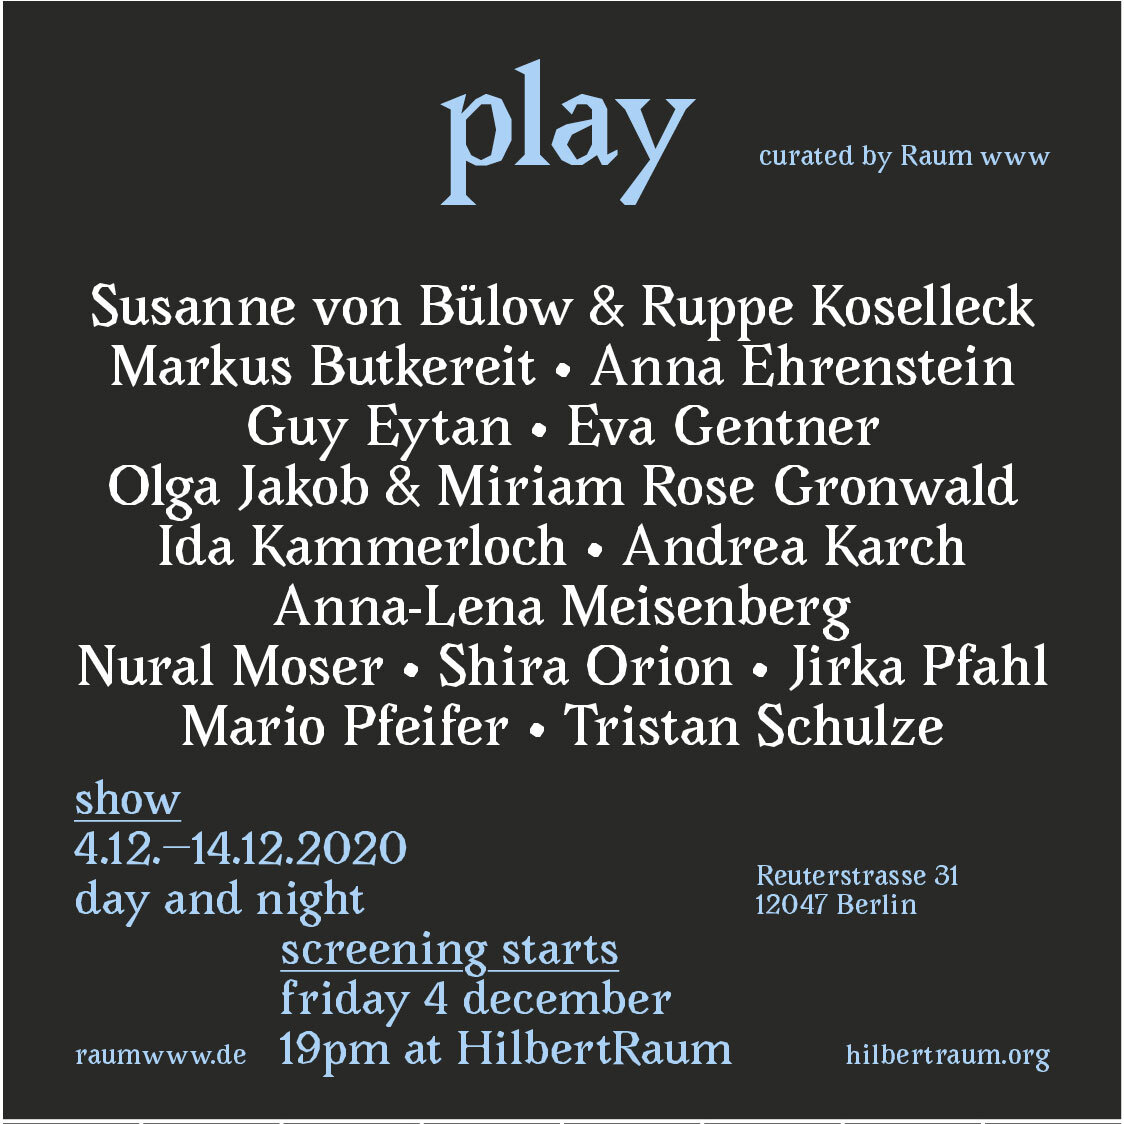 PLAY | curated by Raum www | 4-14 DEC 2020